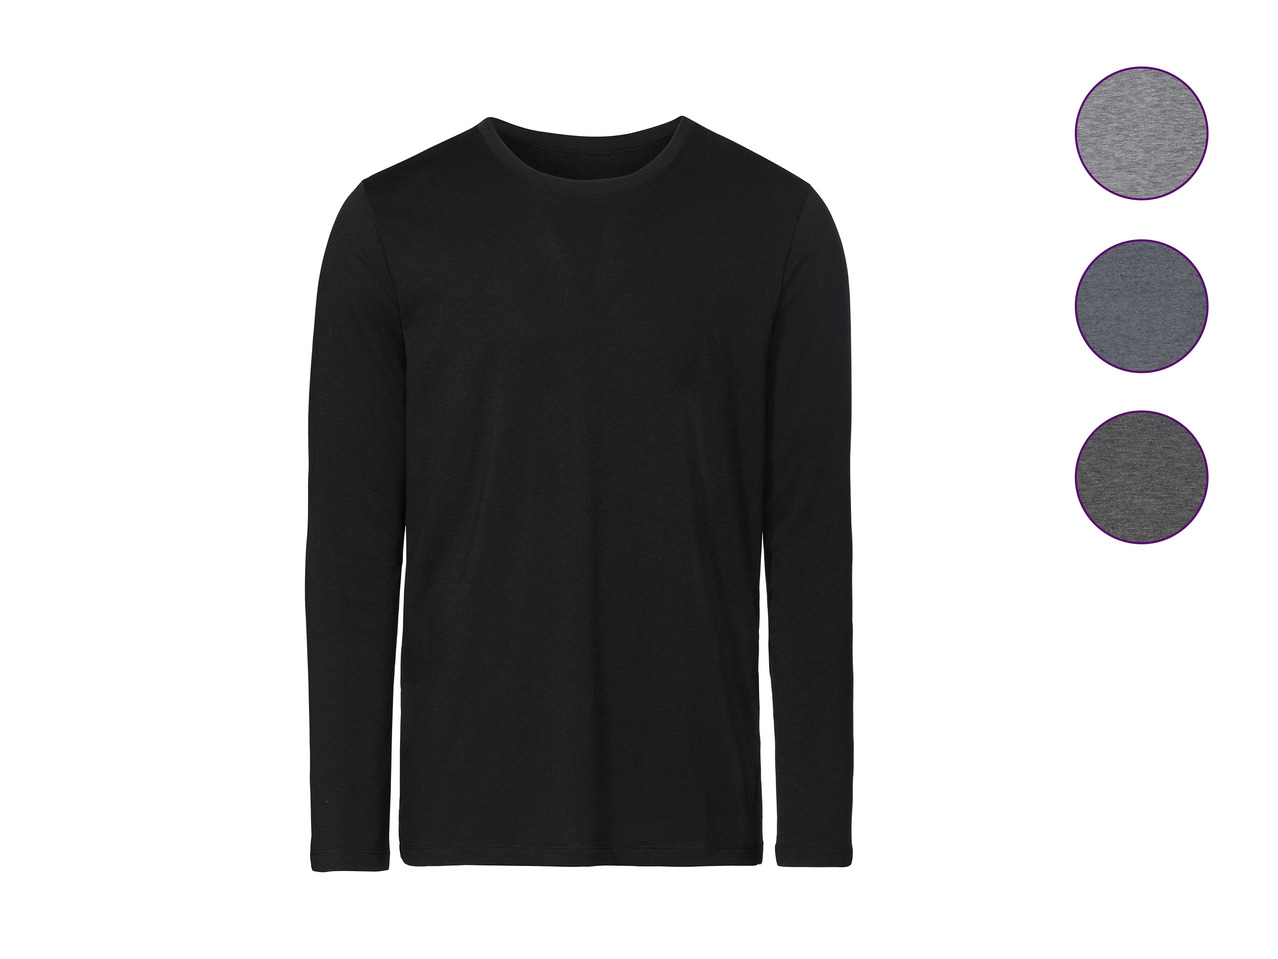 Livergy Men's Thermal Long Sleeve Top1